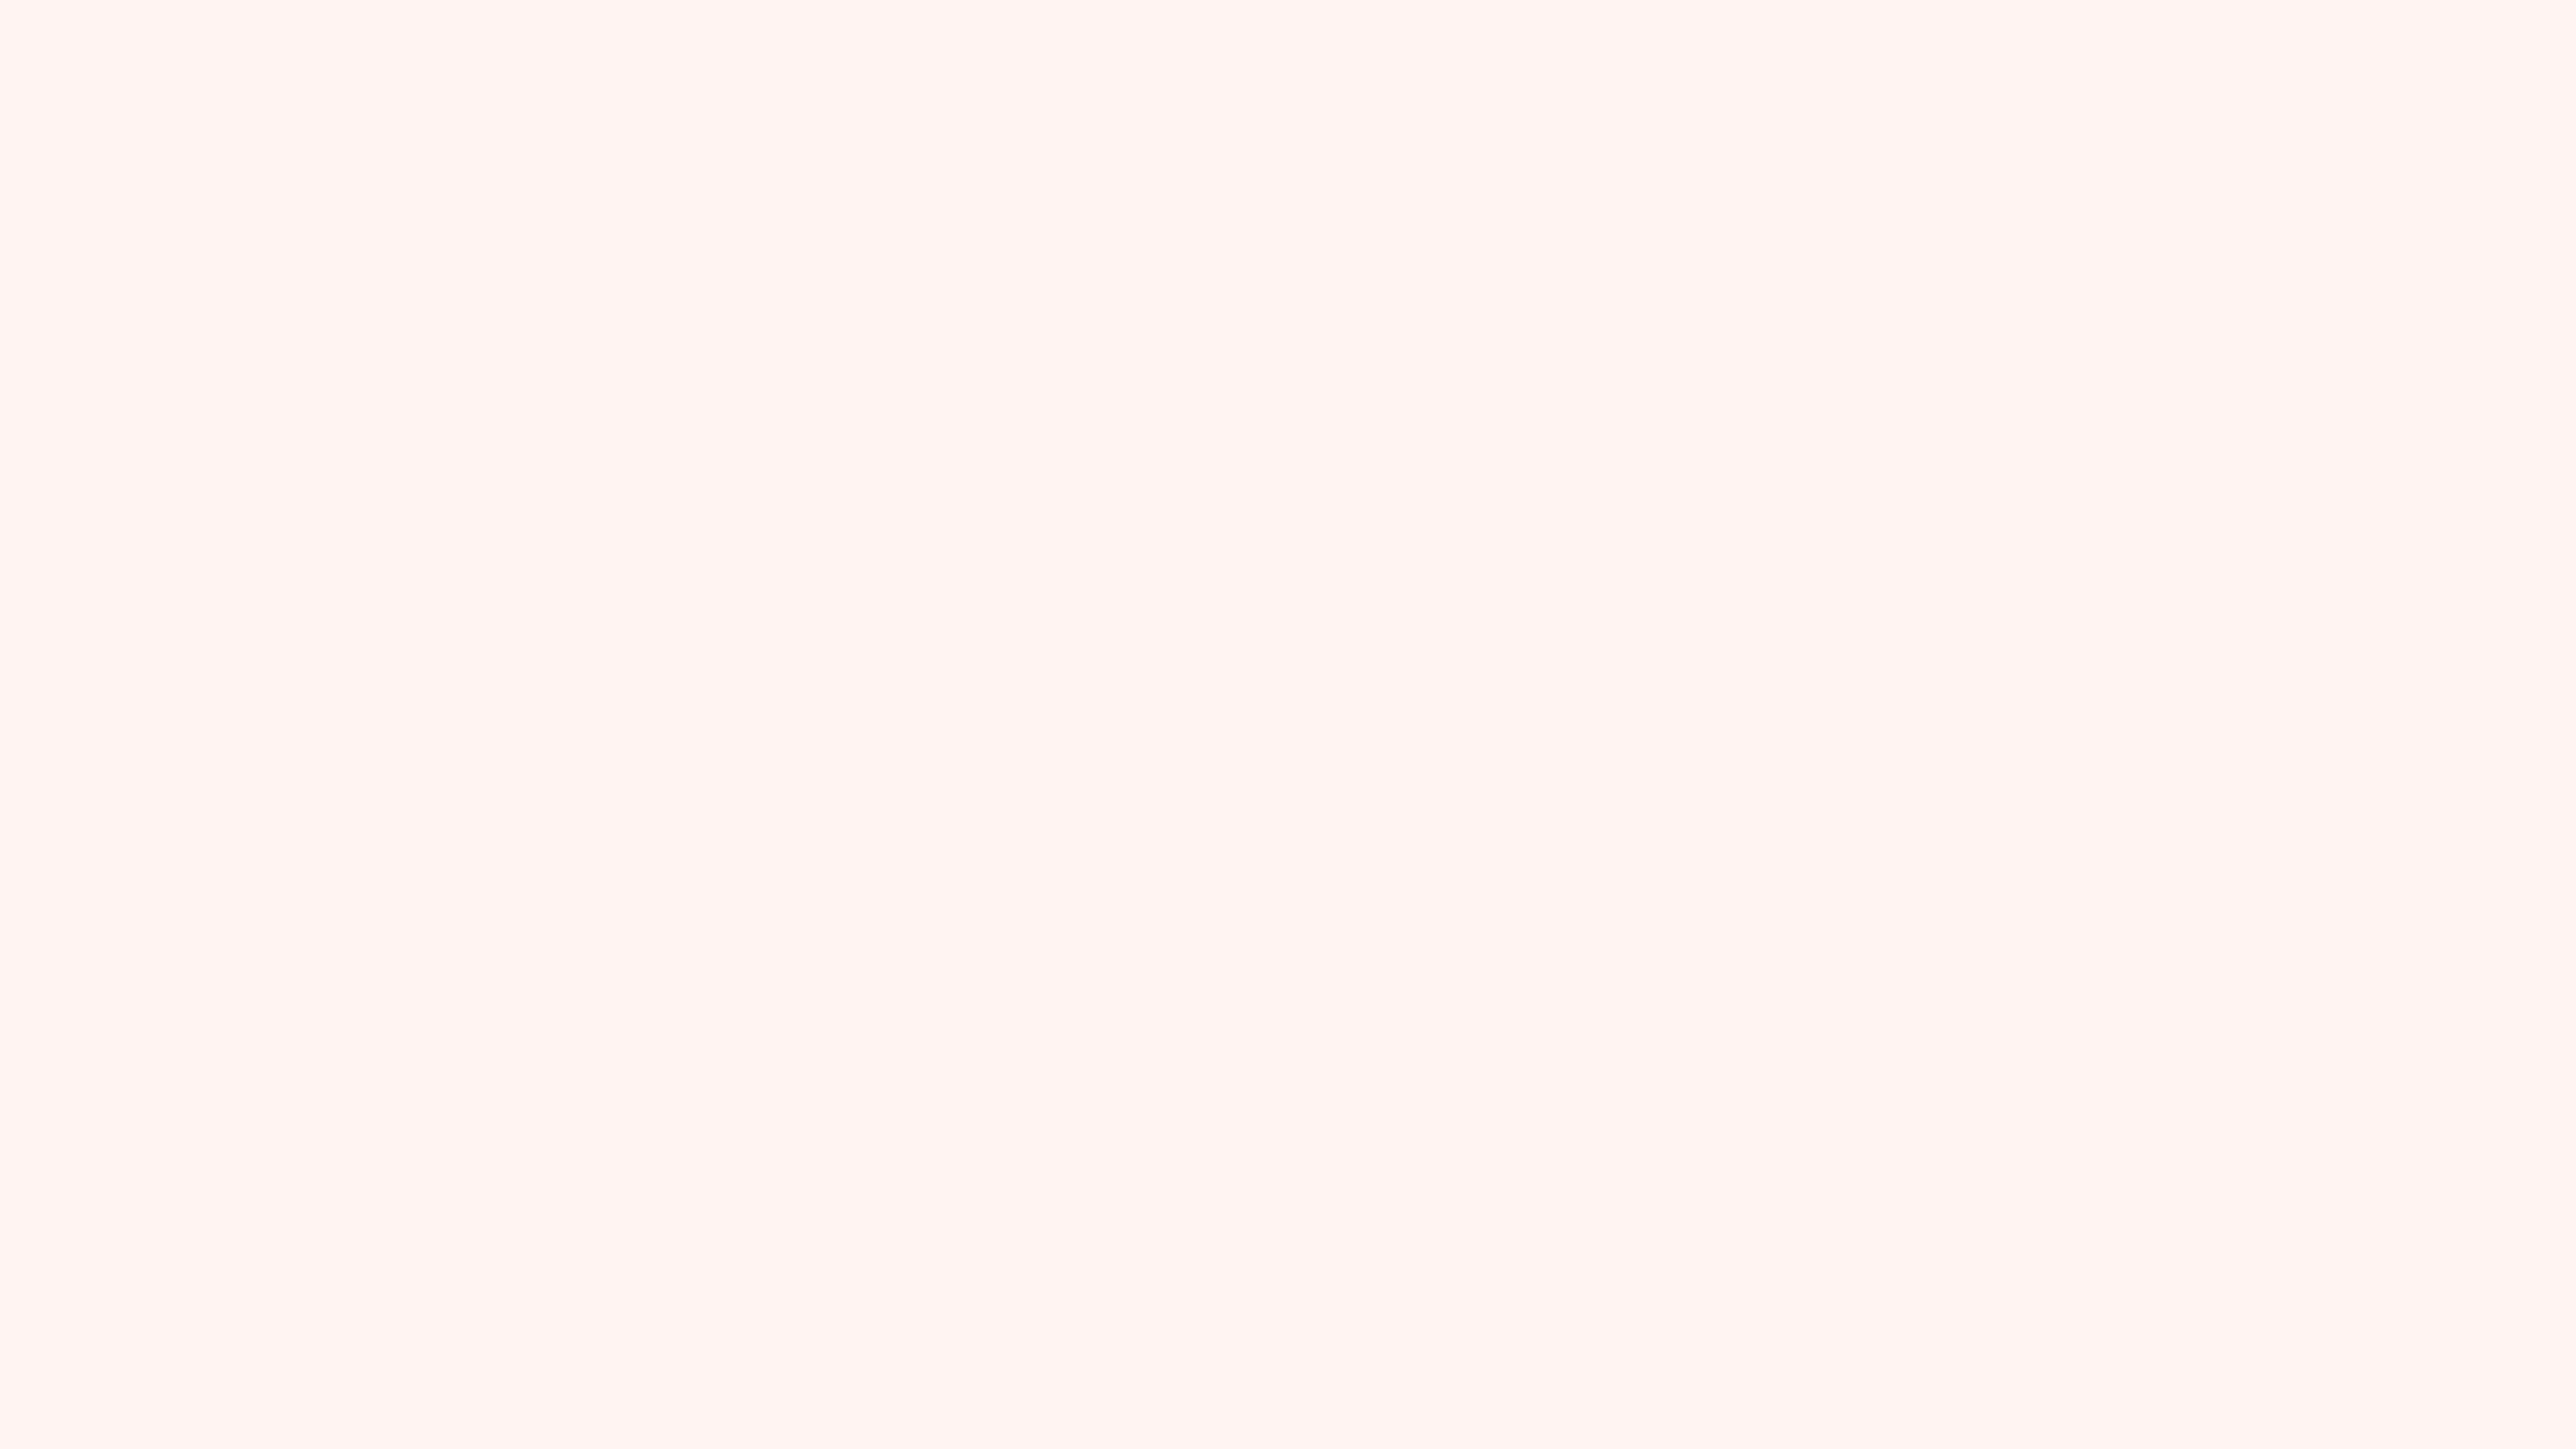 Very Light Pink Solid Color Background Image | Free Image Generator